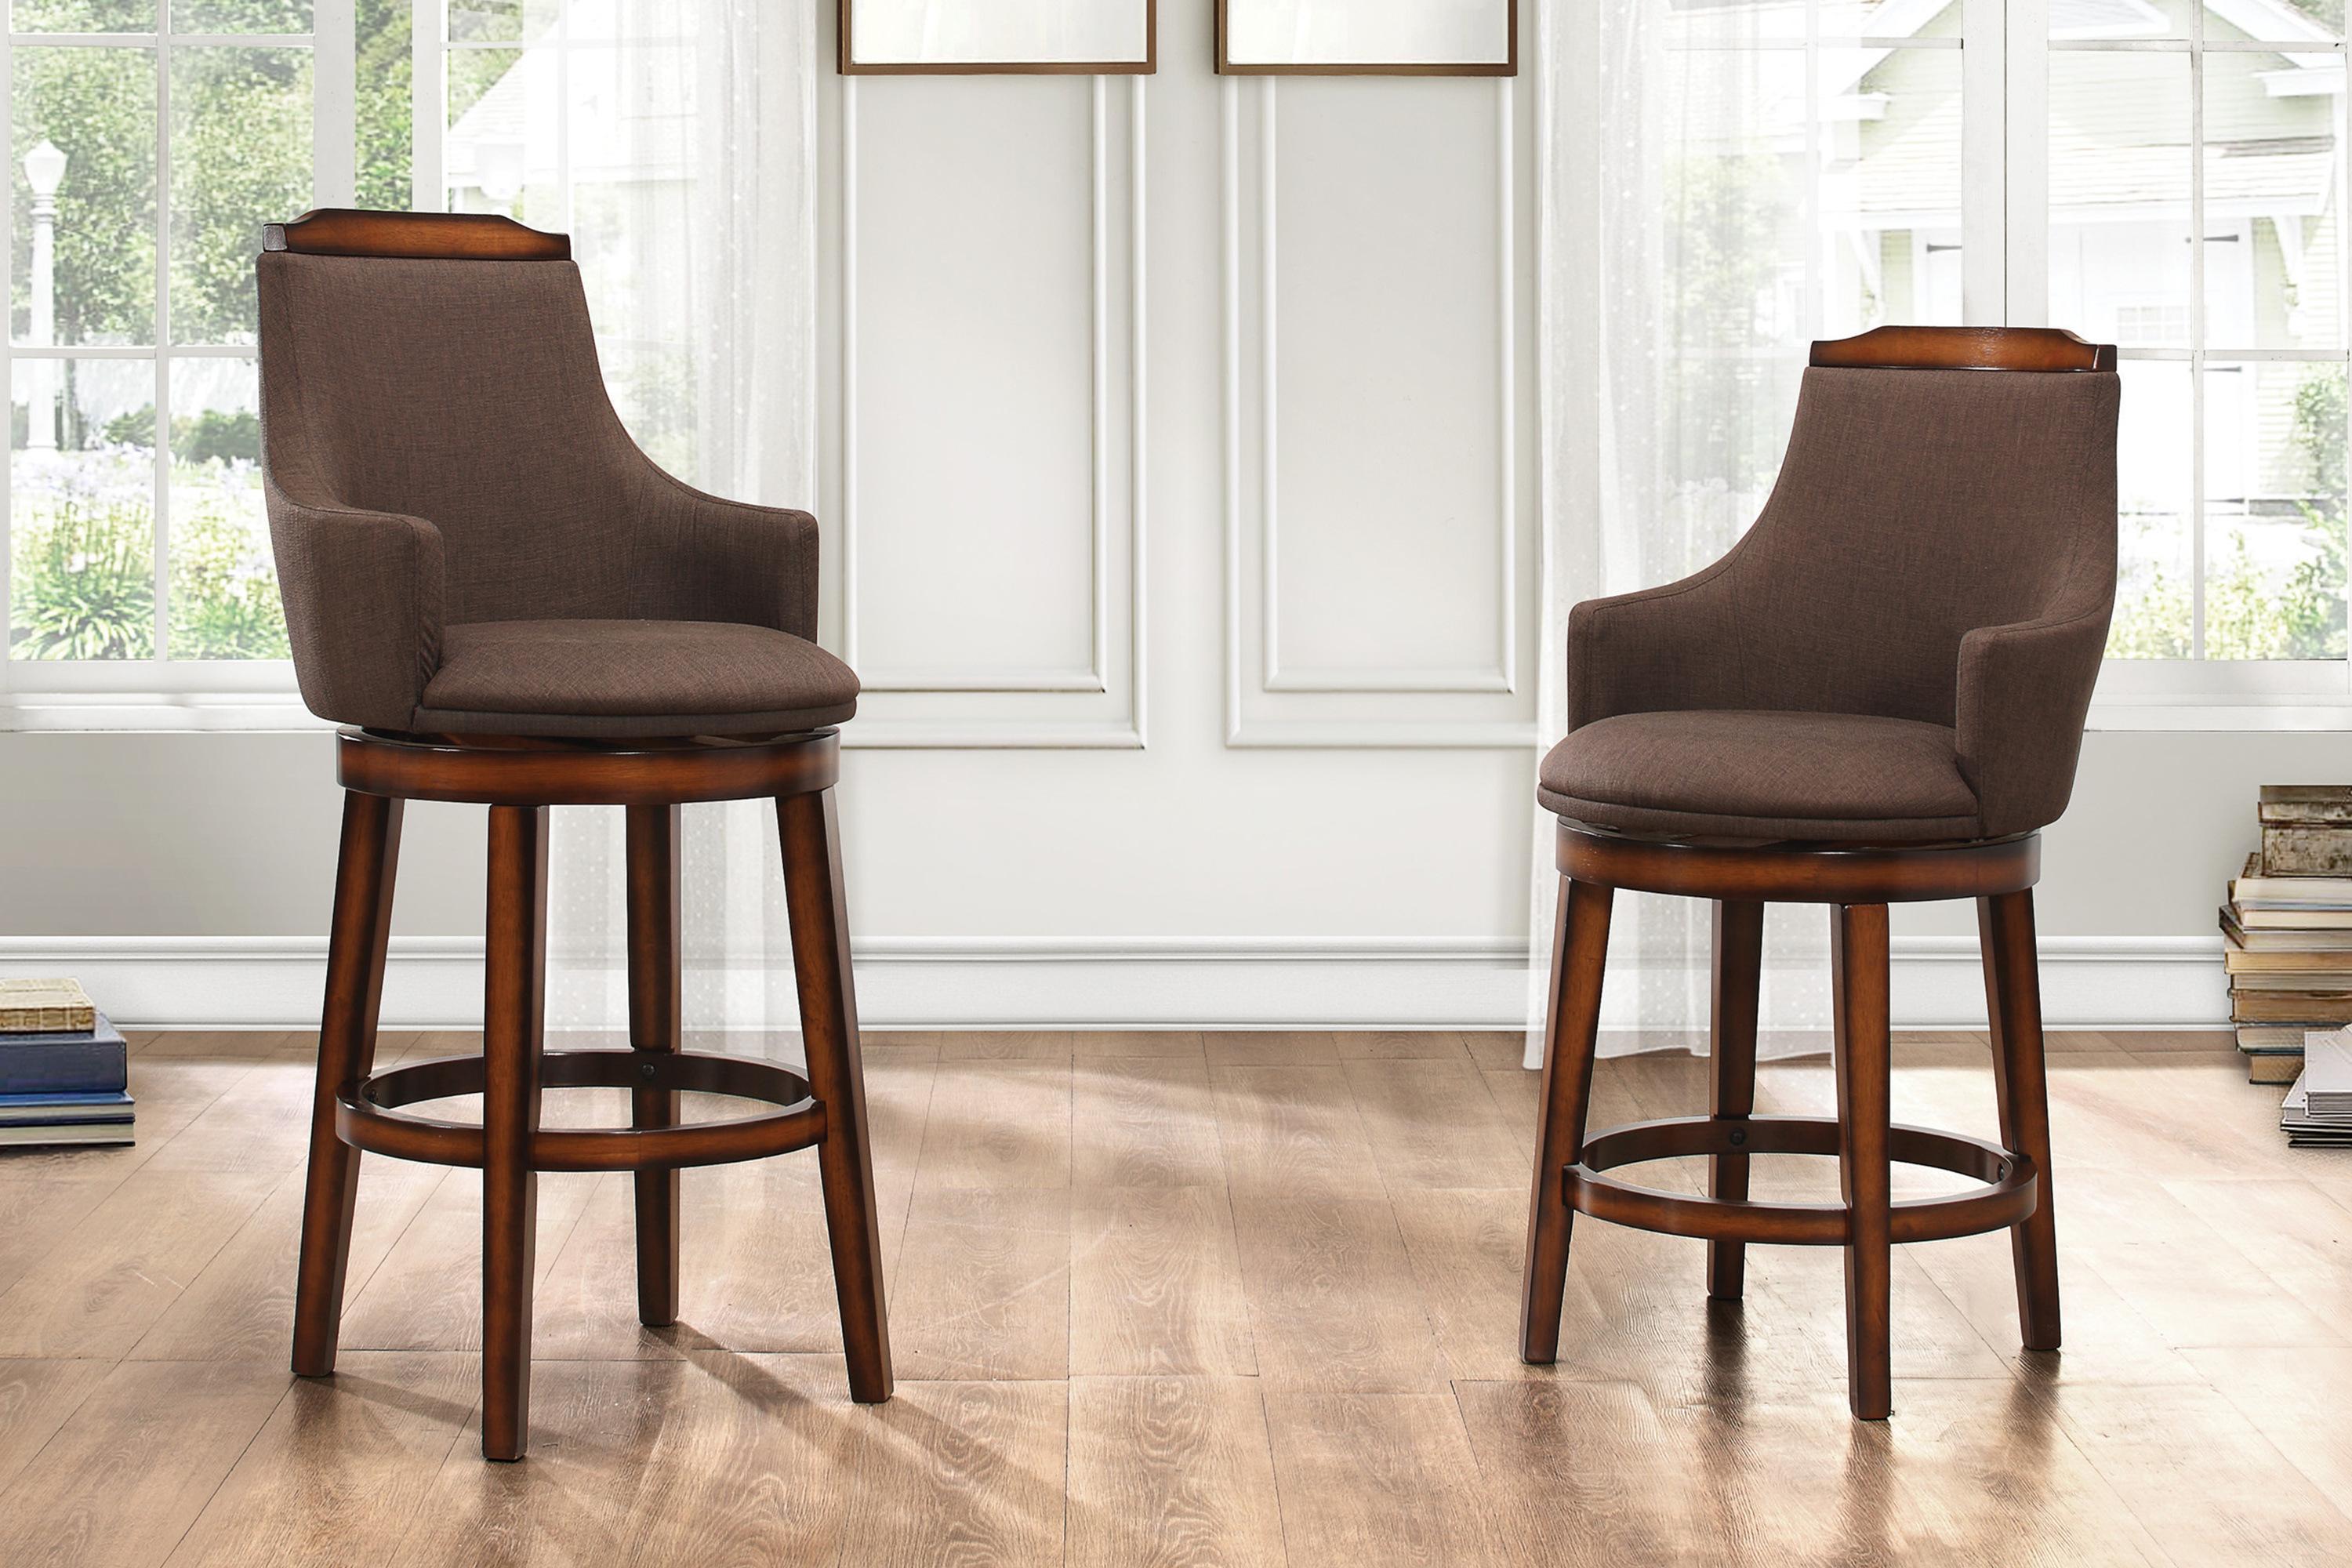 

    
5447-29FAS Transitional Burnished Oak & Chocolate Wood 29" Counter Height Chair Set 2pcs Homelegance 5447-29FAS Bayshore
